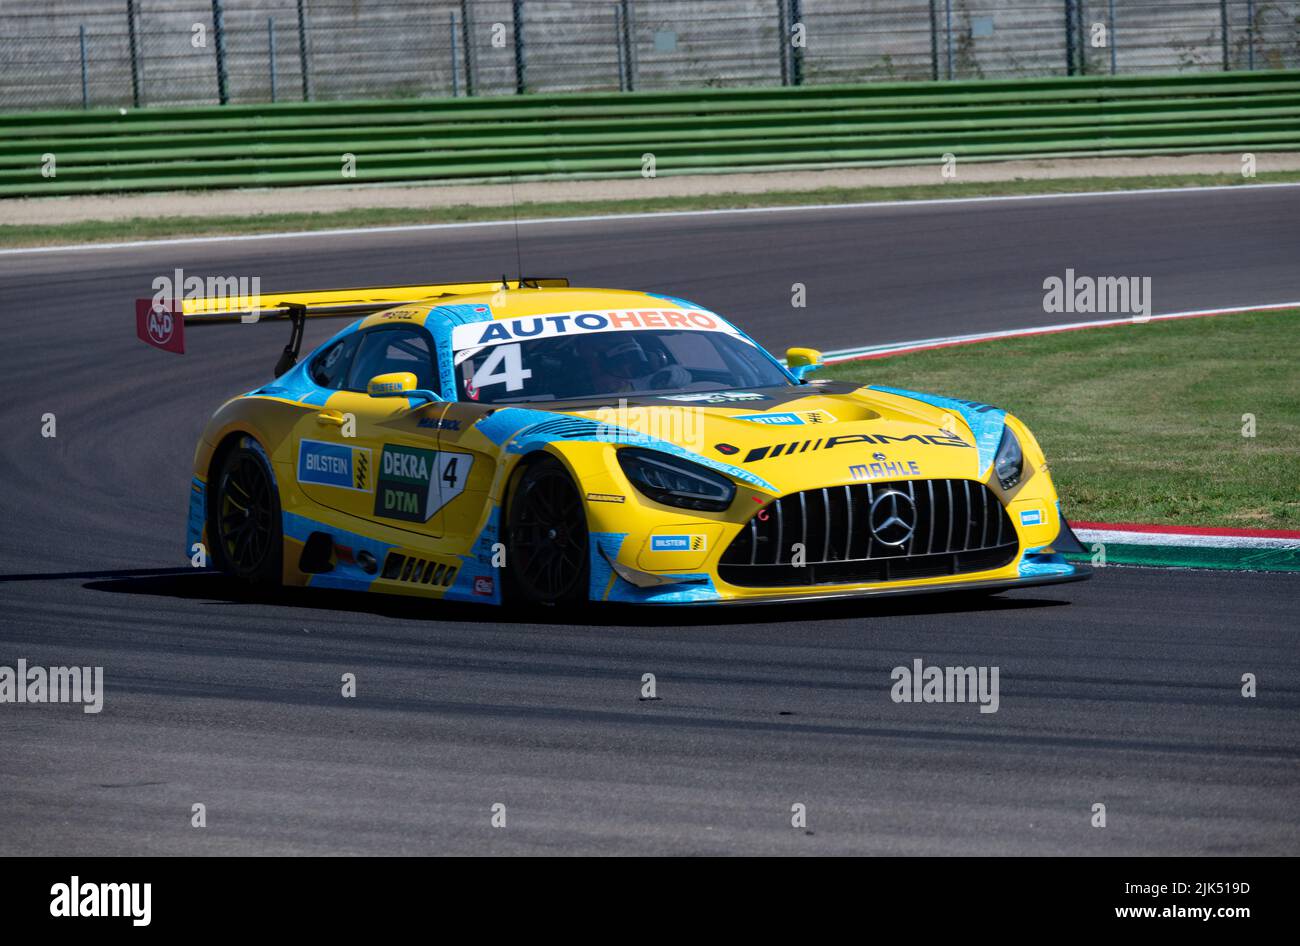 Mercedes AMG GT3 racing super car action fast drive on asphalt race track. Imola, Italy, june 18 2022. DTM Stock Photo